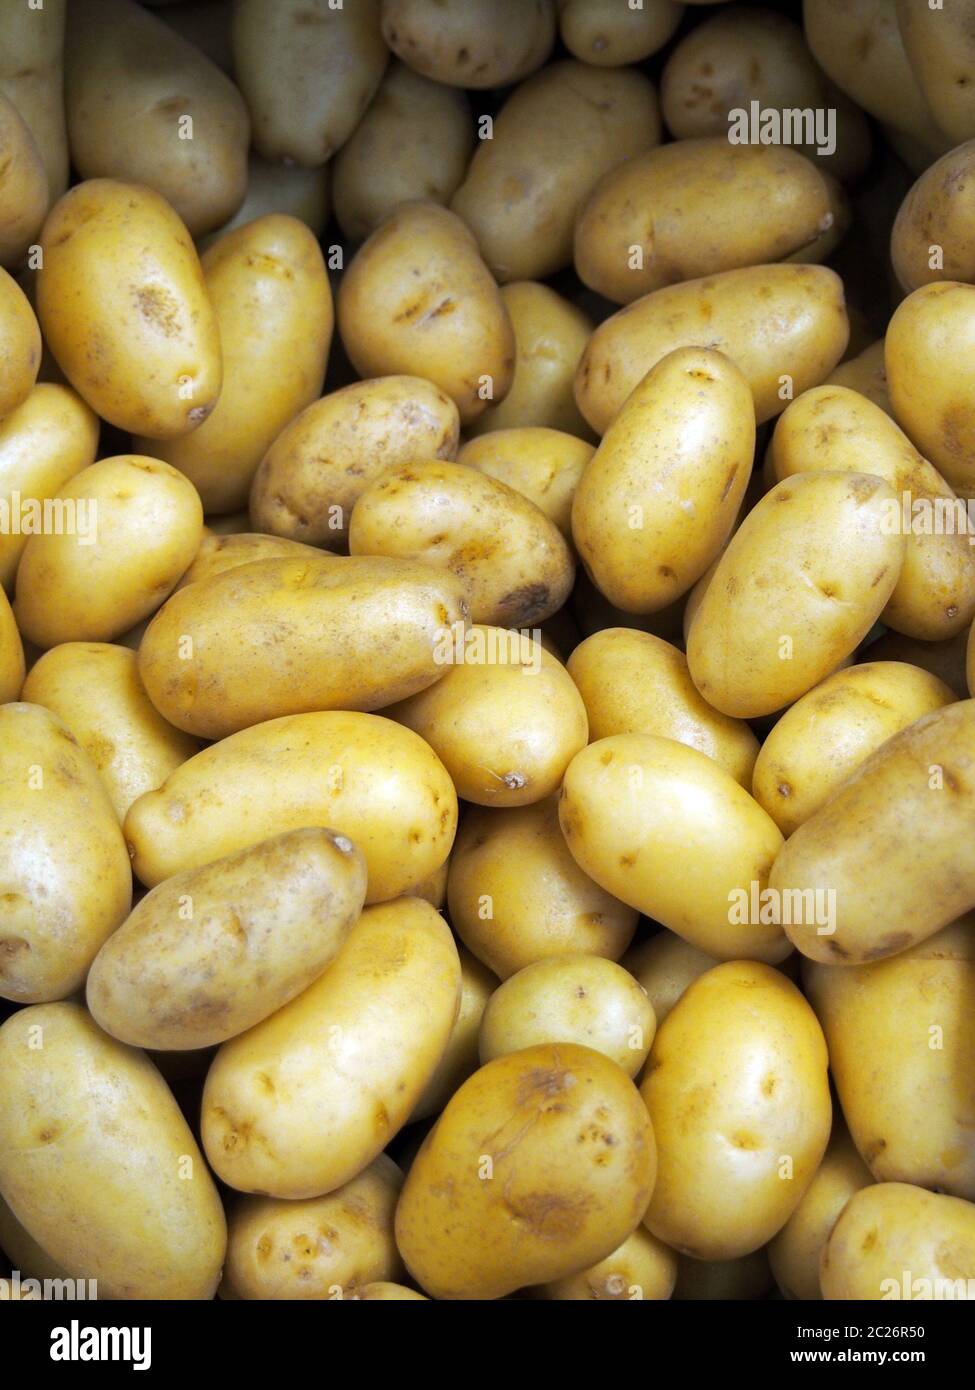 a pile of small yellow irregular shaped small waxy potatoes for sale on a market Stock Photo